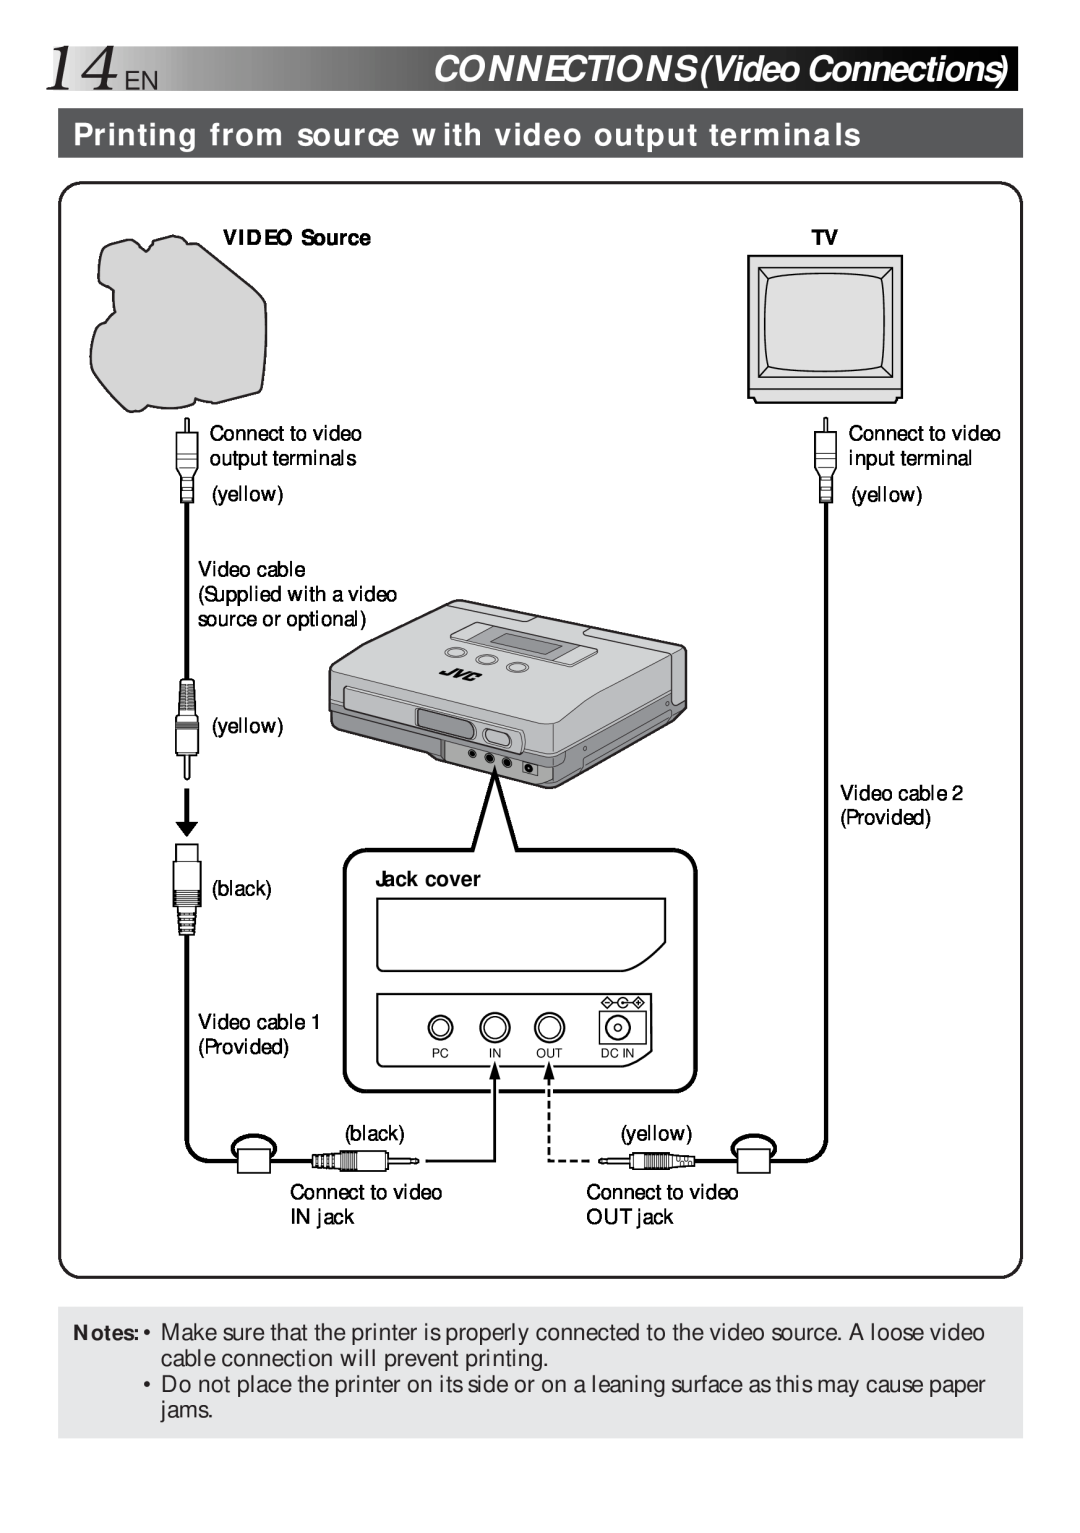 JVC GV-HT1 manual 14EN, CONNECTIONSVideoConnections, Printing from source with video output terminals 